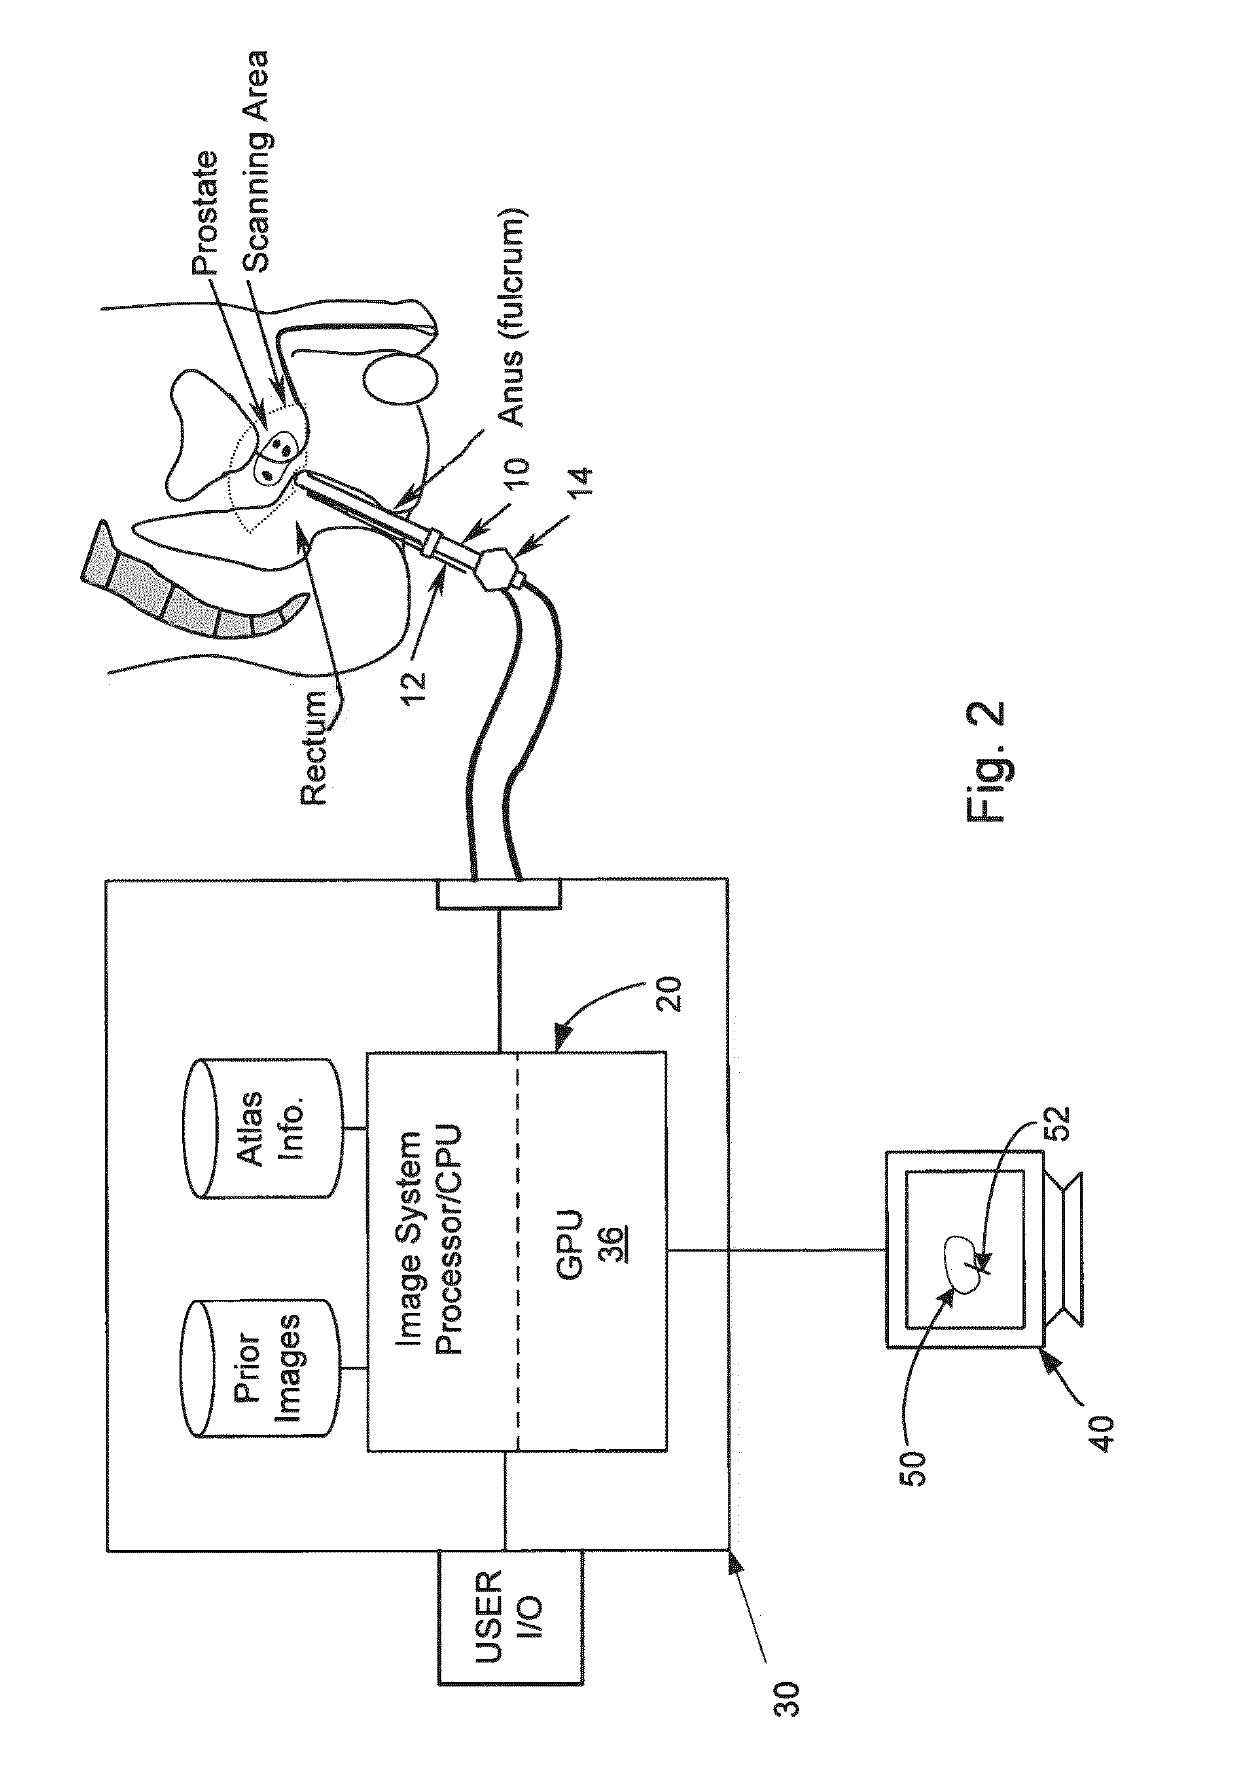 Apparatus for real-time 3D biopsy